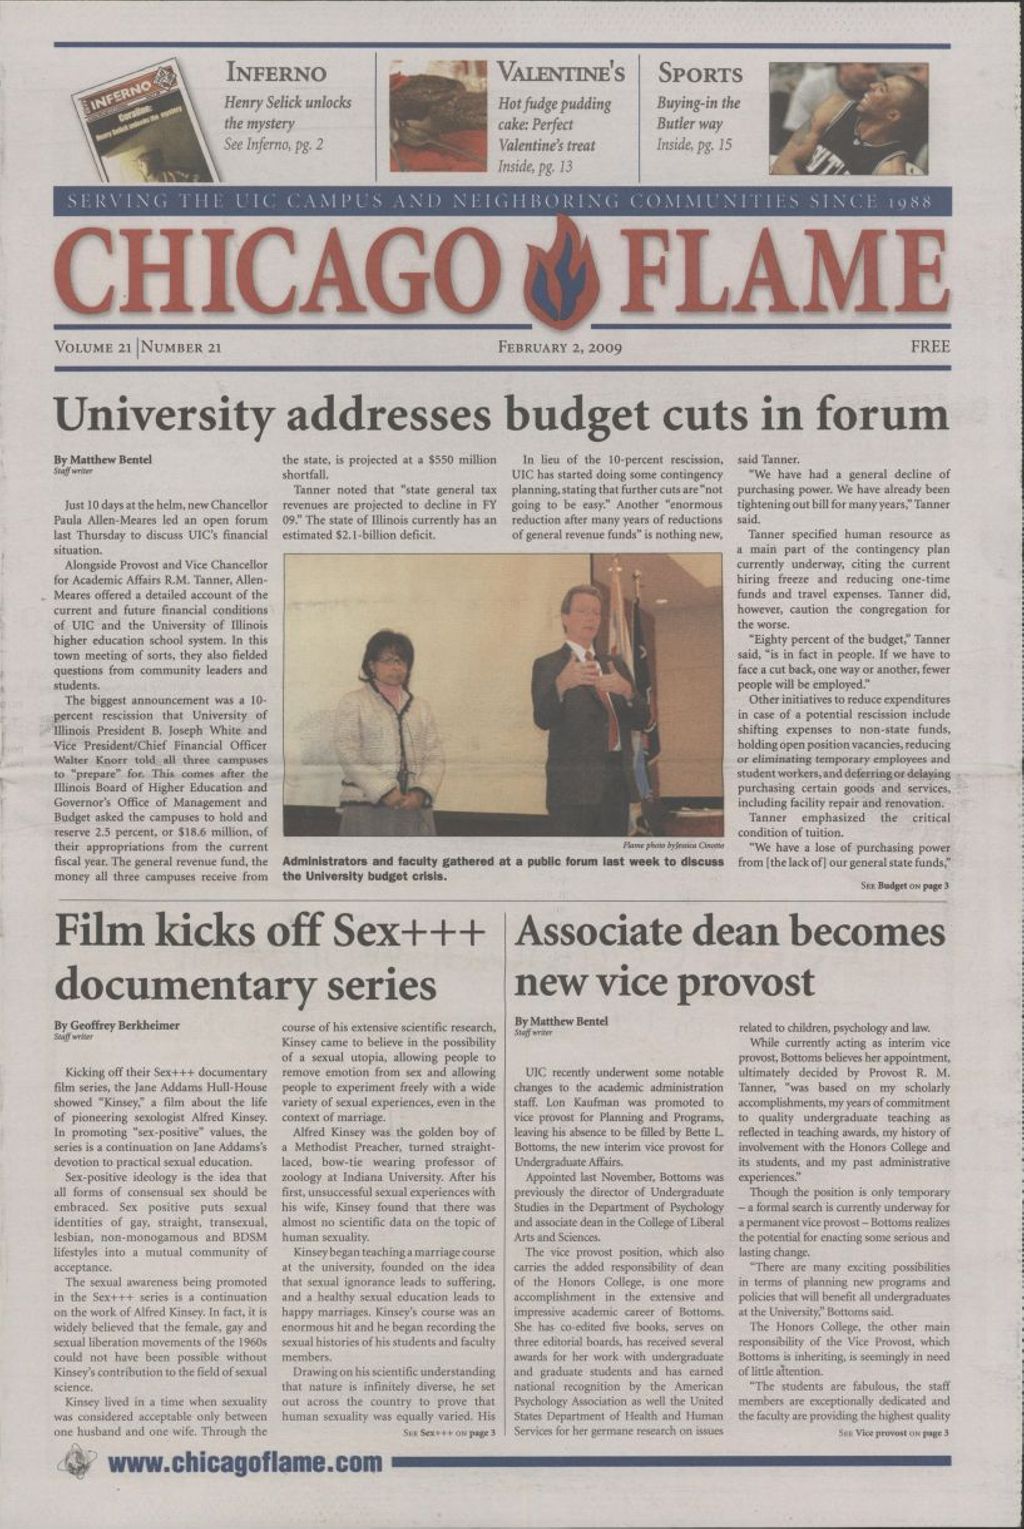 Miniature of Chicago Flame (February 2, 2009)